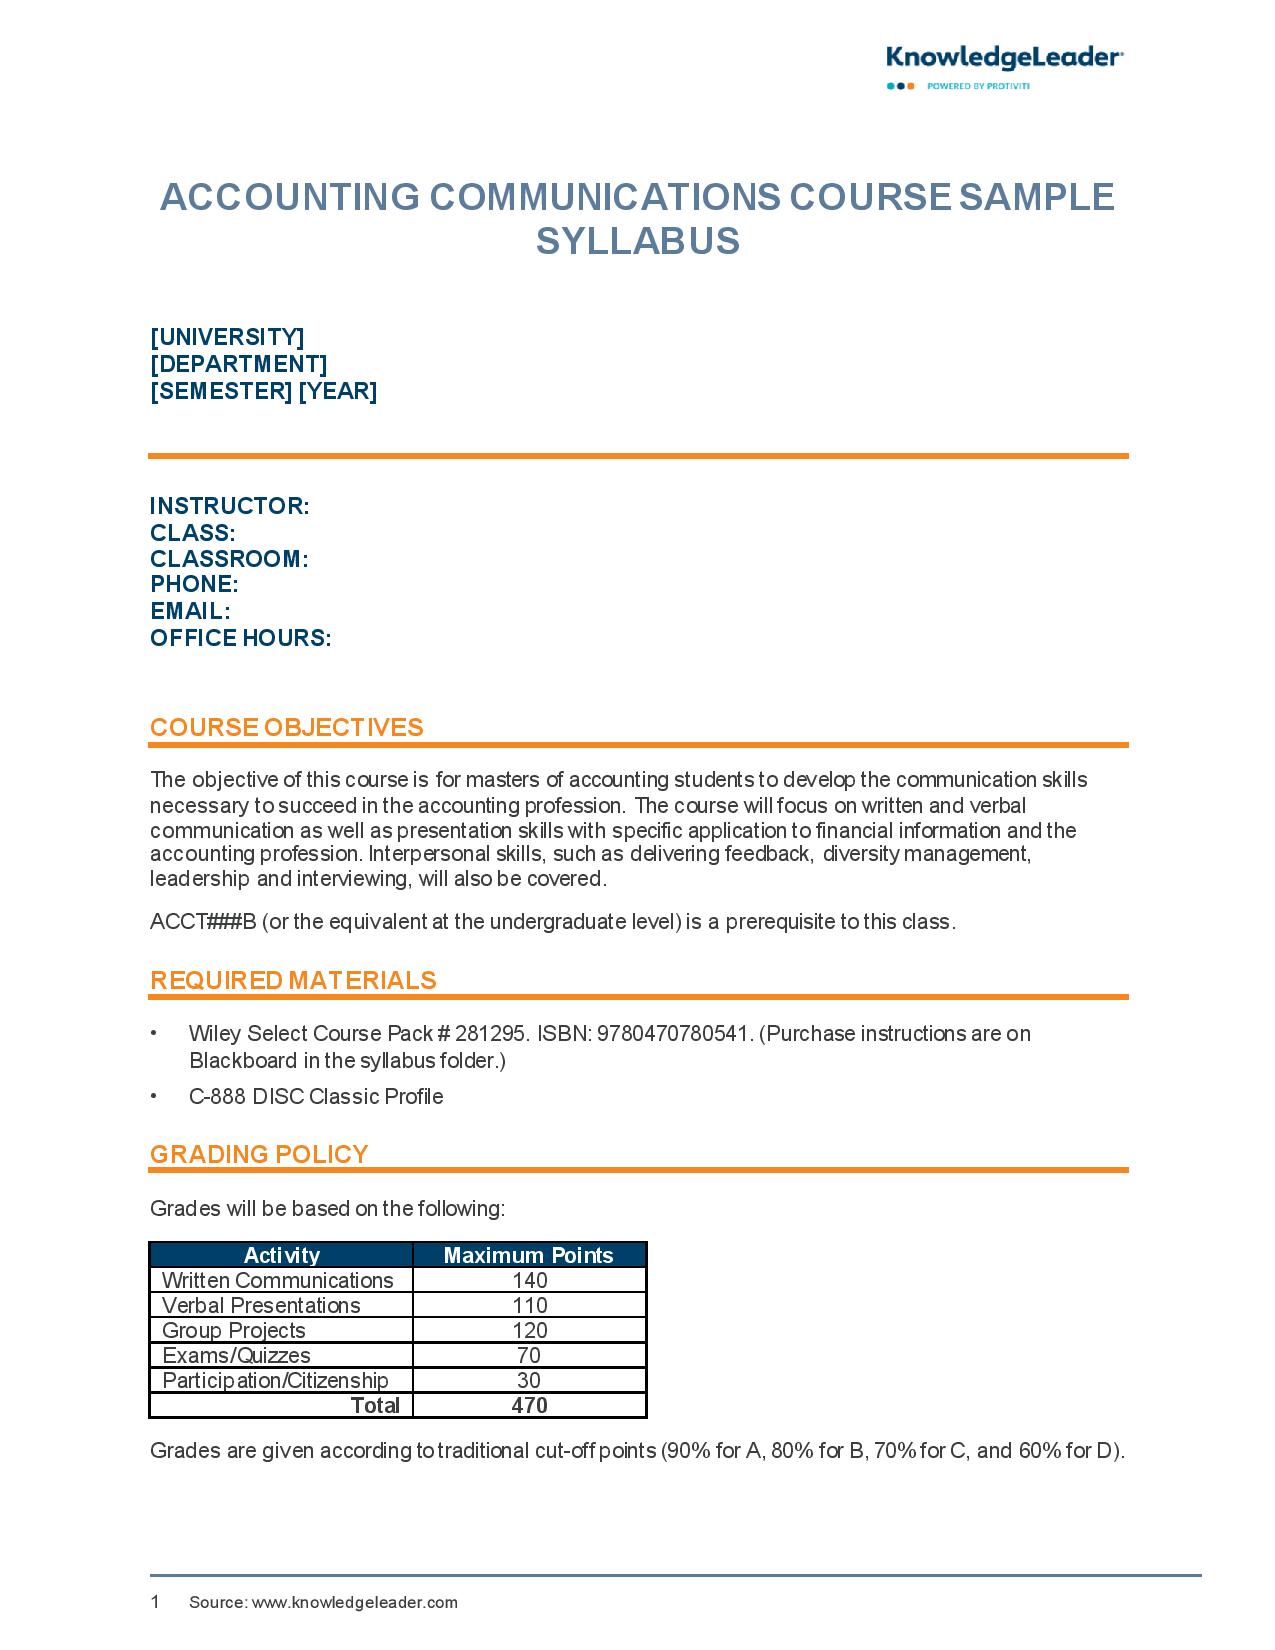 Screenshot of the first page of Accounting Communications Course Sample Syllabus